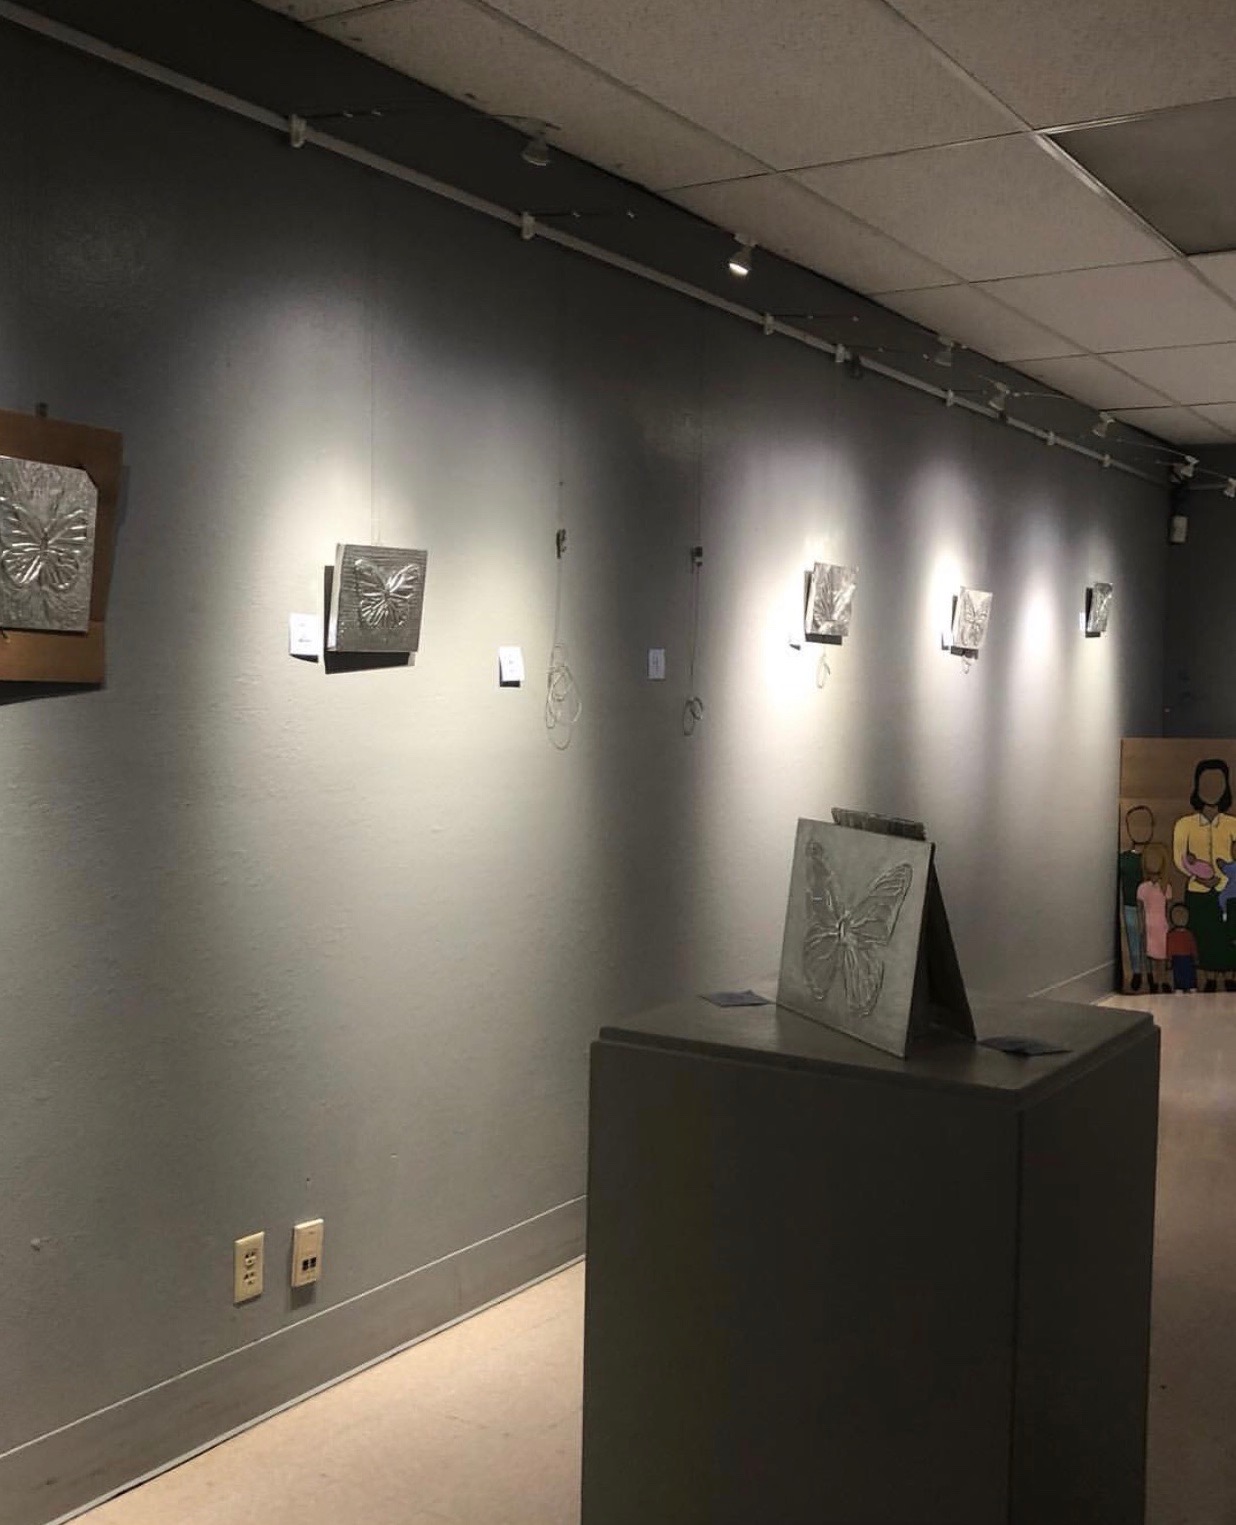 The class' repujado art pieces hanging in the Phoenix Center for the Arts